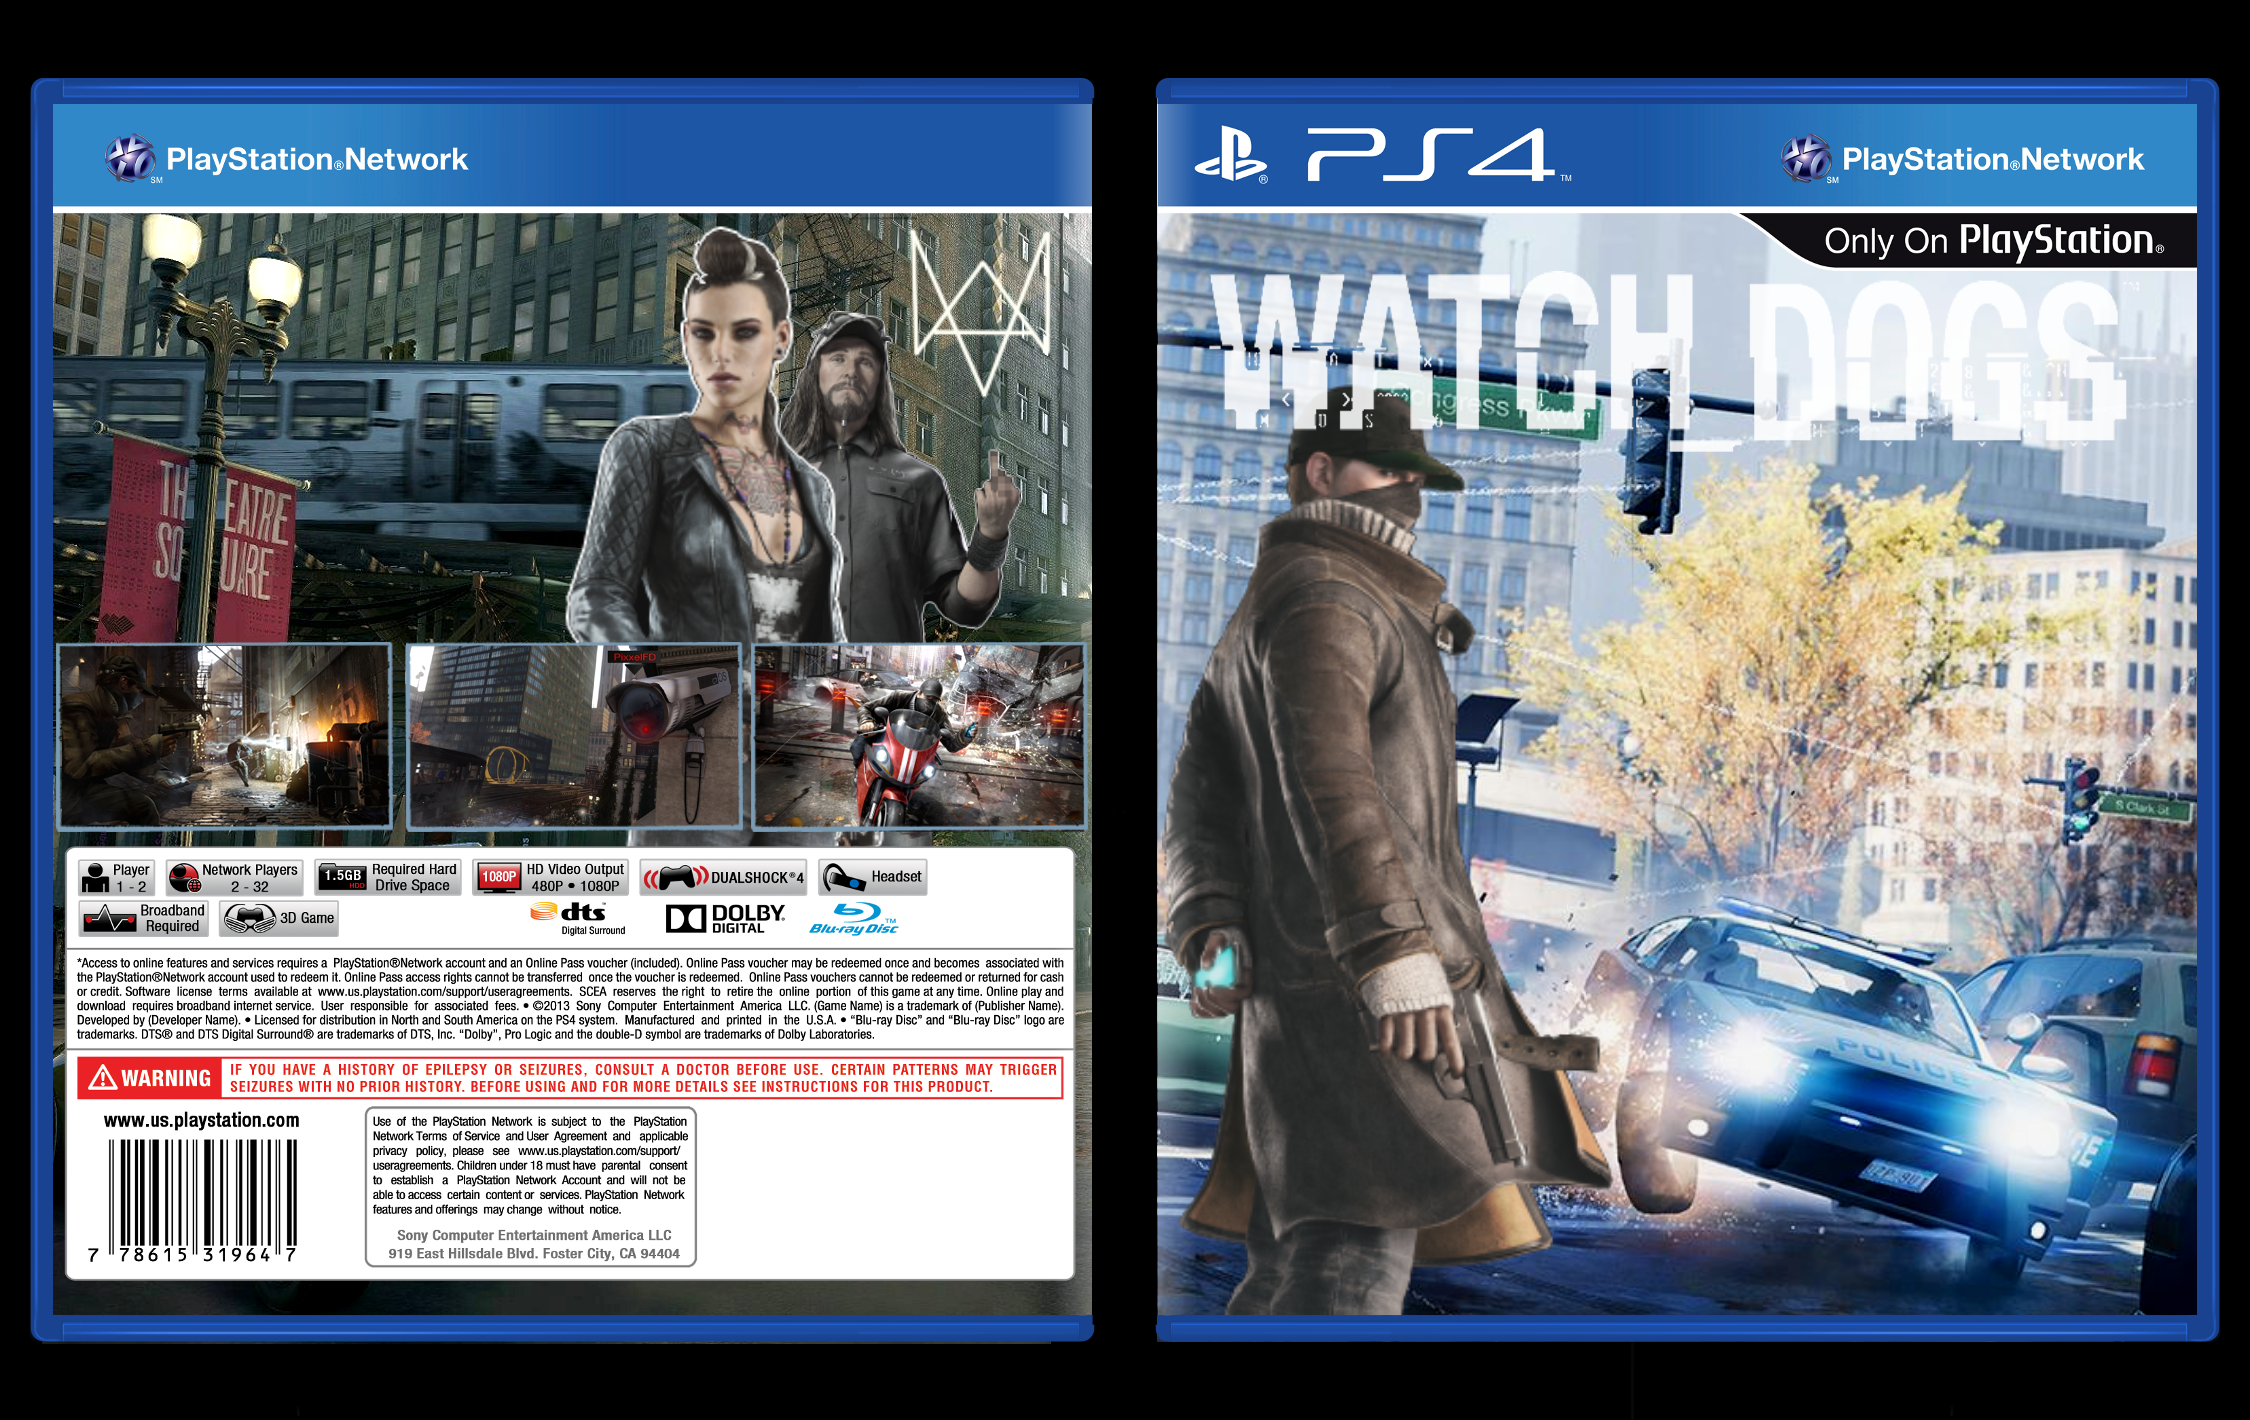 Watch_Dogs box cover